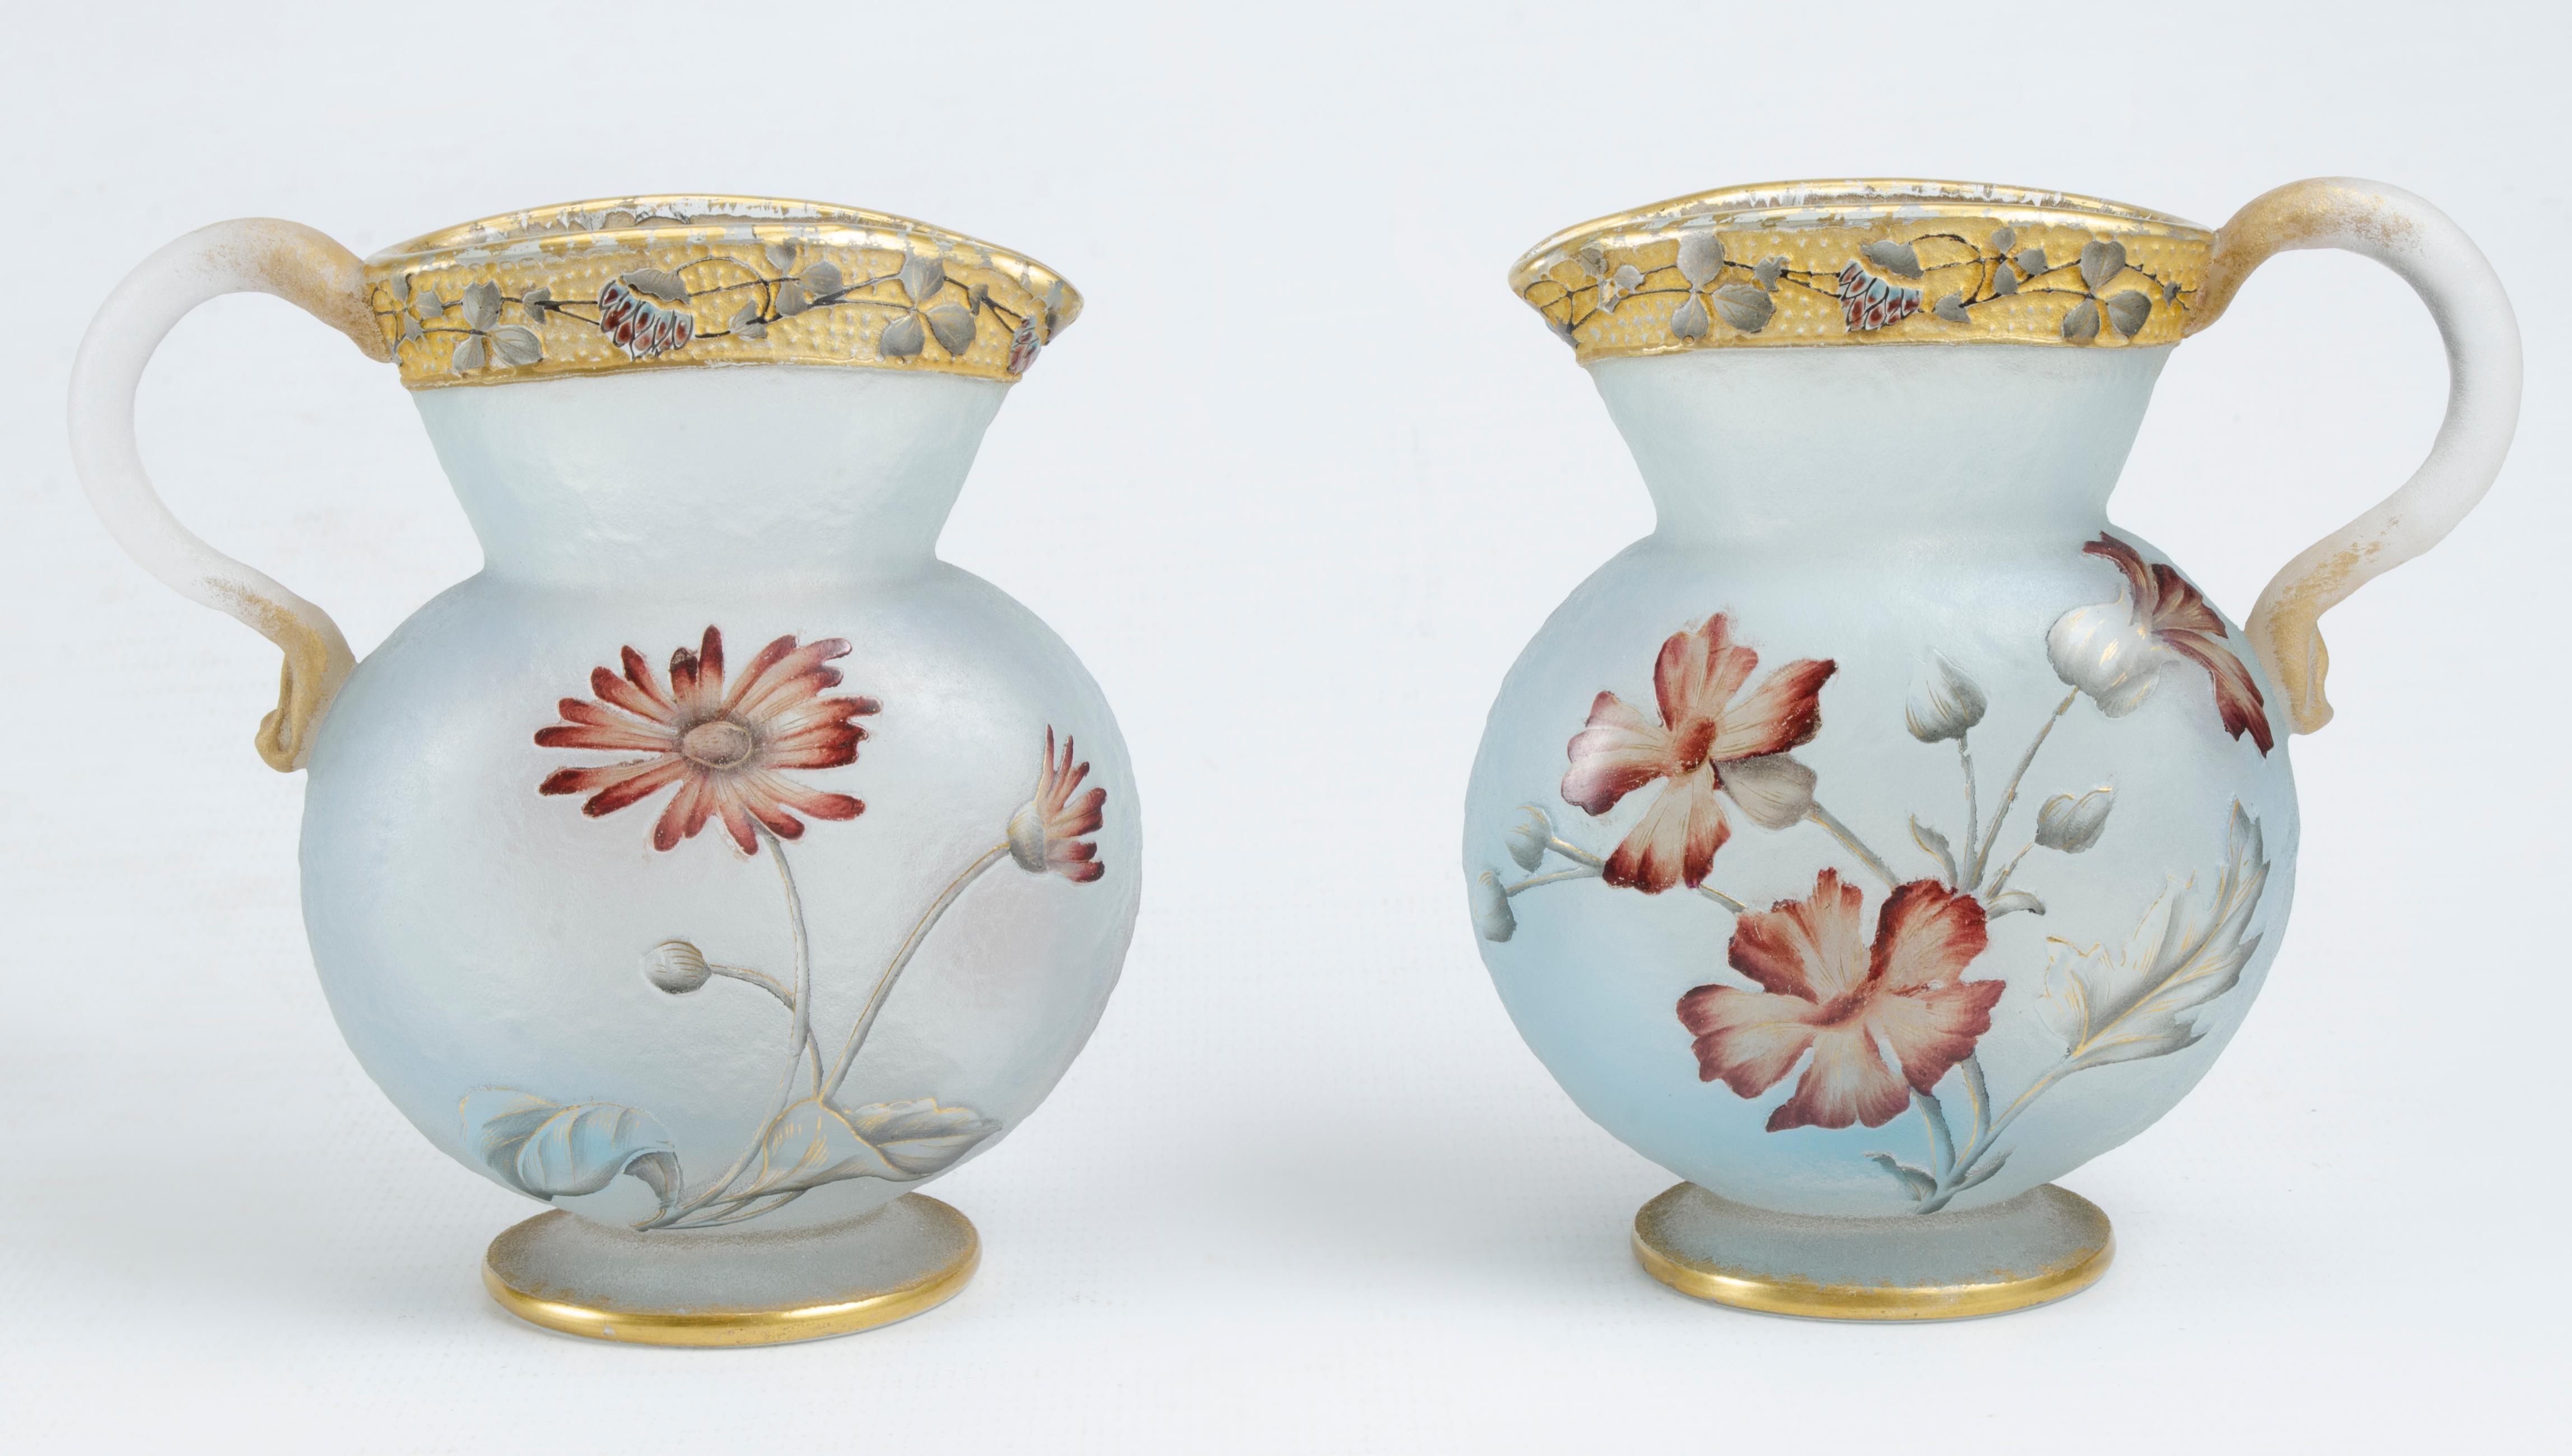 Pair of Daum Nancy miniture jugs
Origin France Circa 1900
Perfect condition without restorations
Enamel with natural wear
Gold signature on its base with a cross of Lorraine
Technique: acid etching, textured background and polychrome enamels and